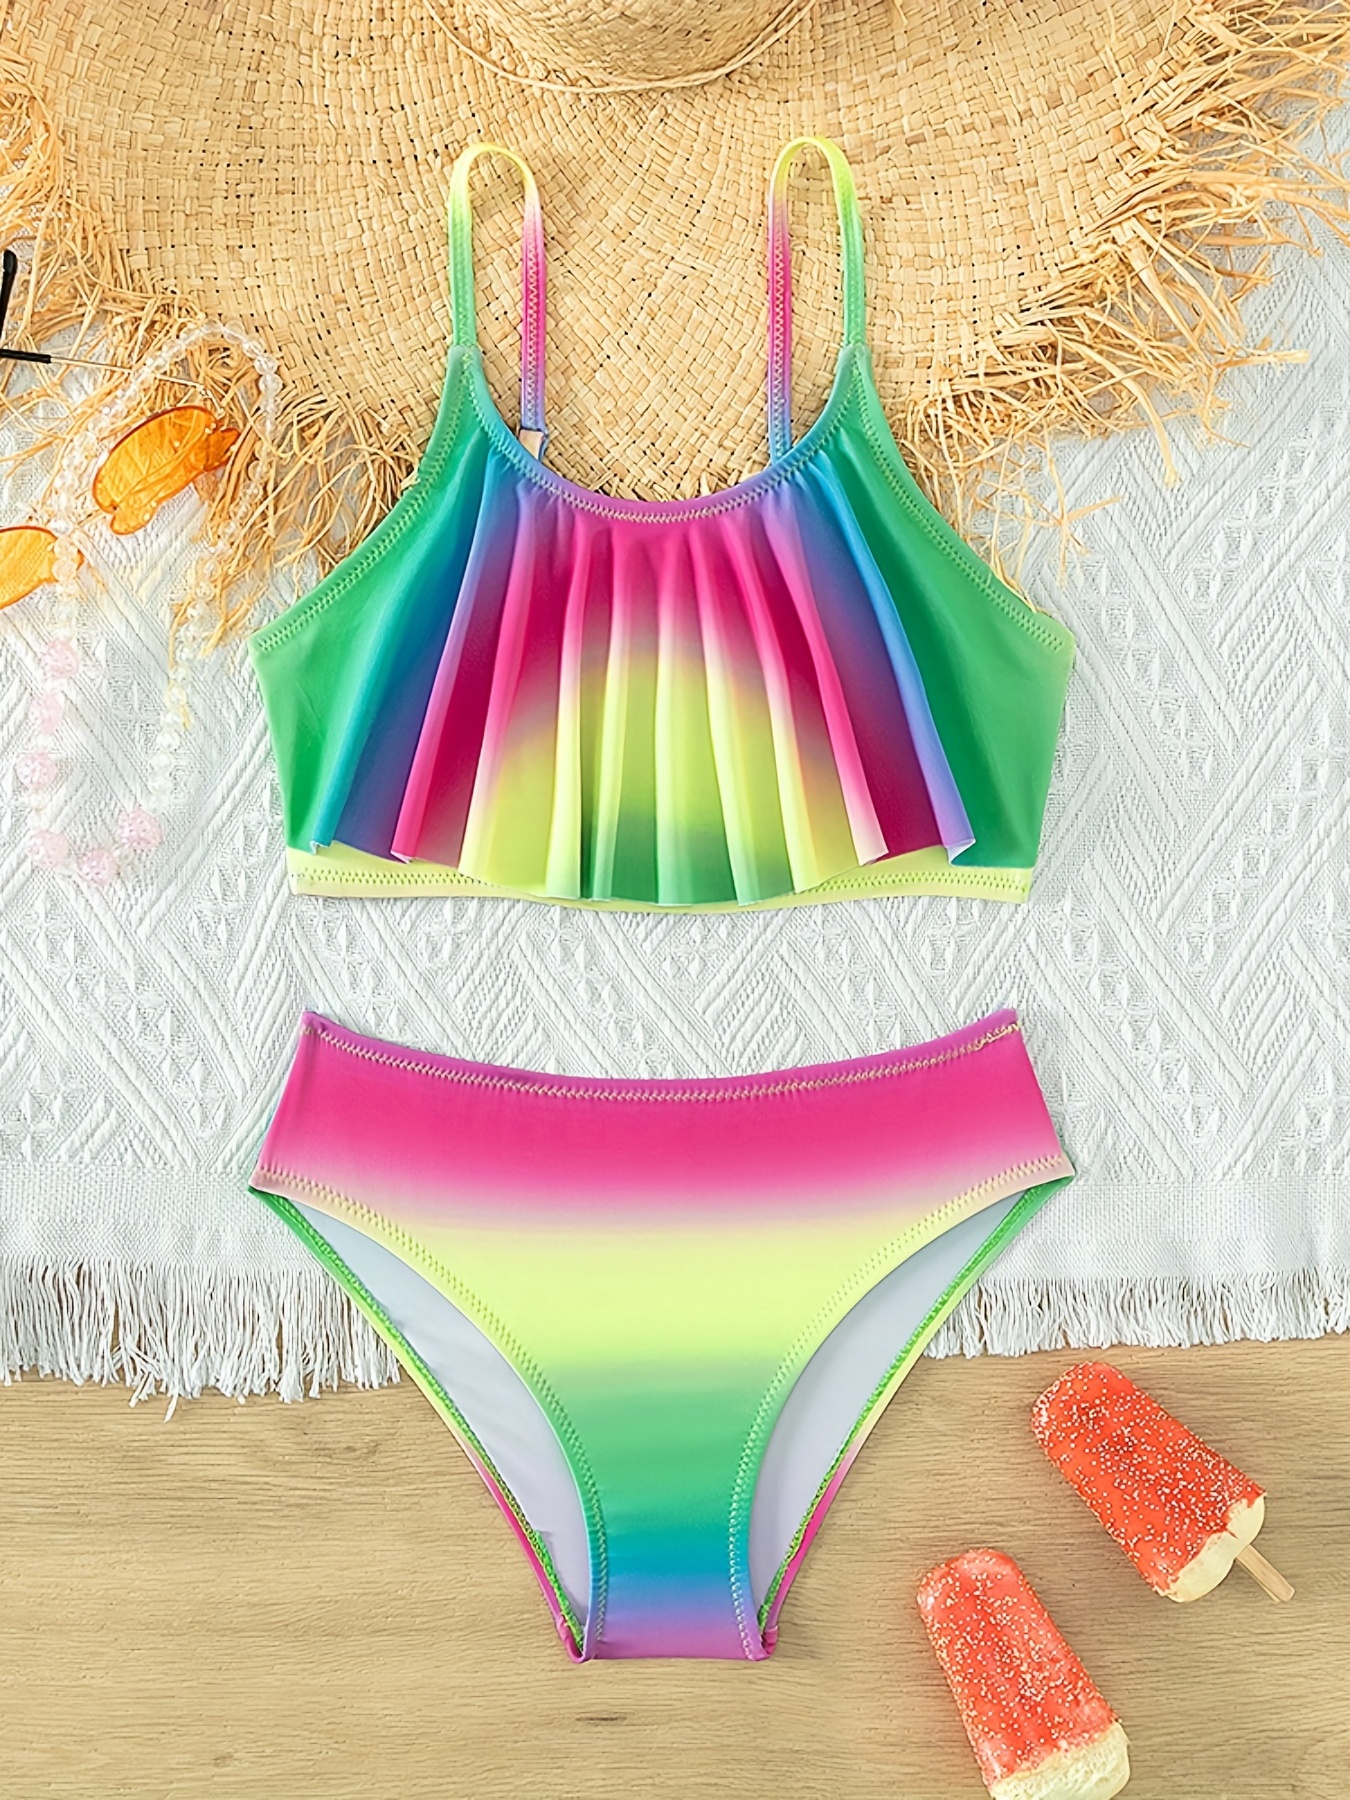 Swim Suits for Tween Girls Two Piece Baby Kids Girls Summer Print  Professional Training Swimwear Swimsuit Fashion Clothes 2-11Y Set 2 